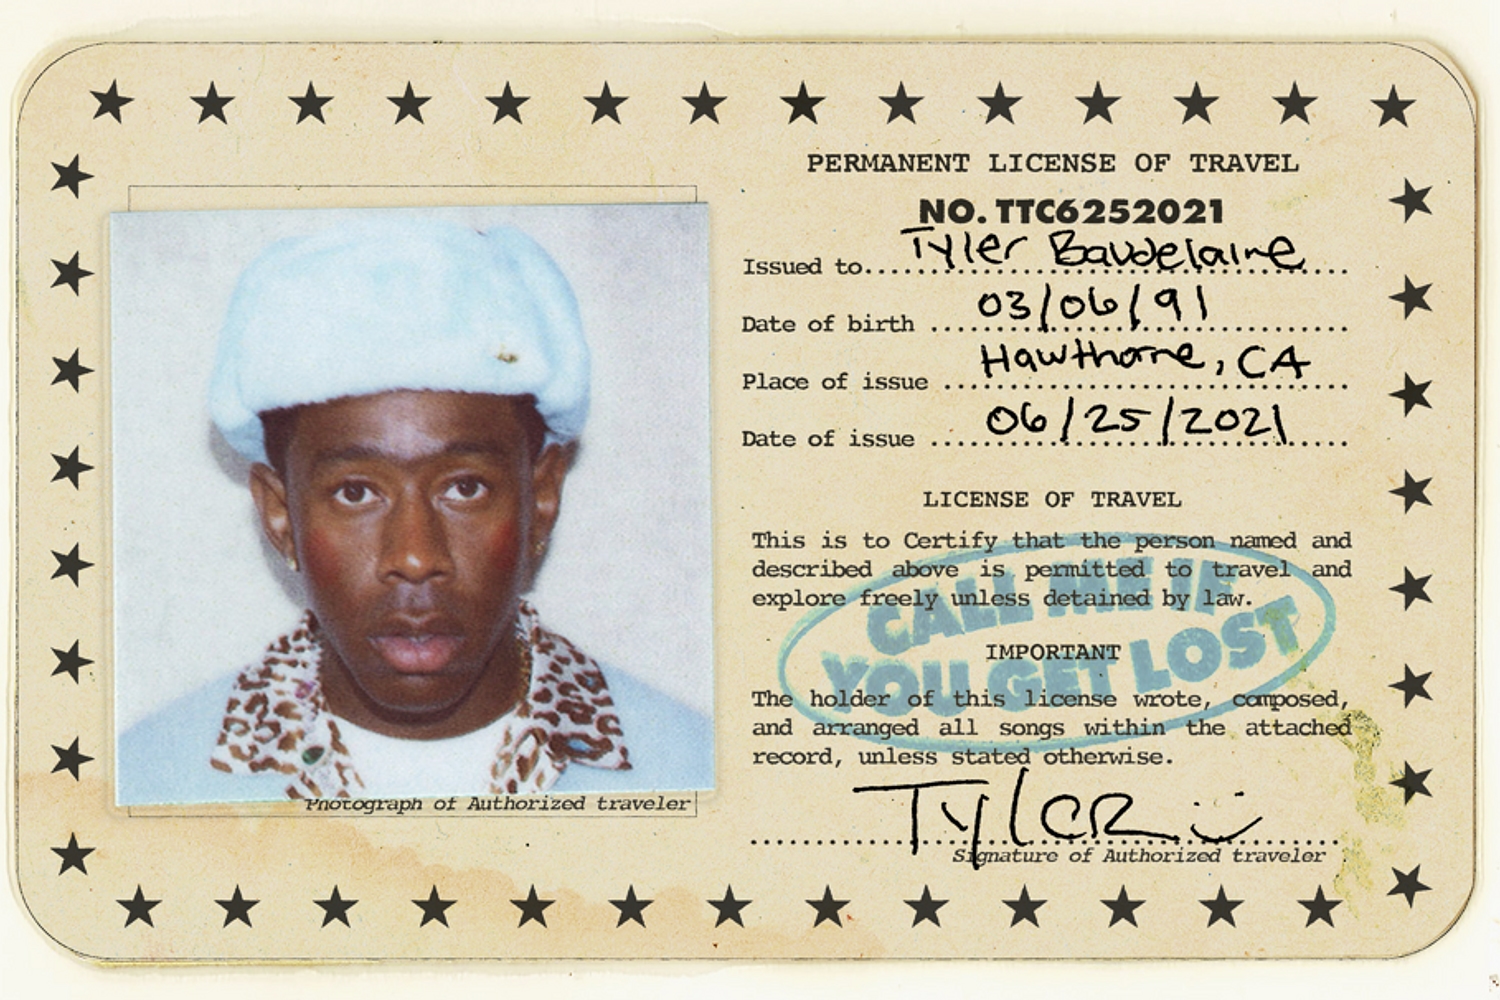 Tyler, The Creator announces new album ‘Call Me If You Get Lost’